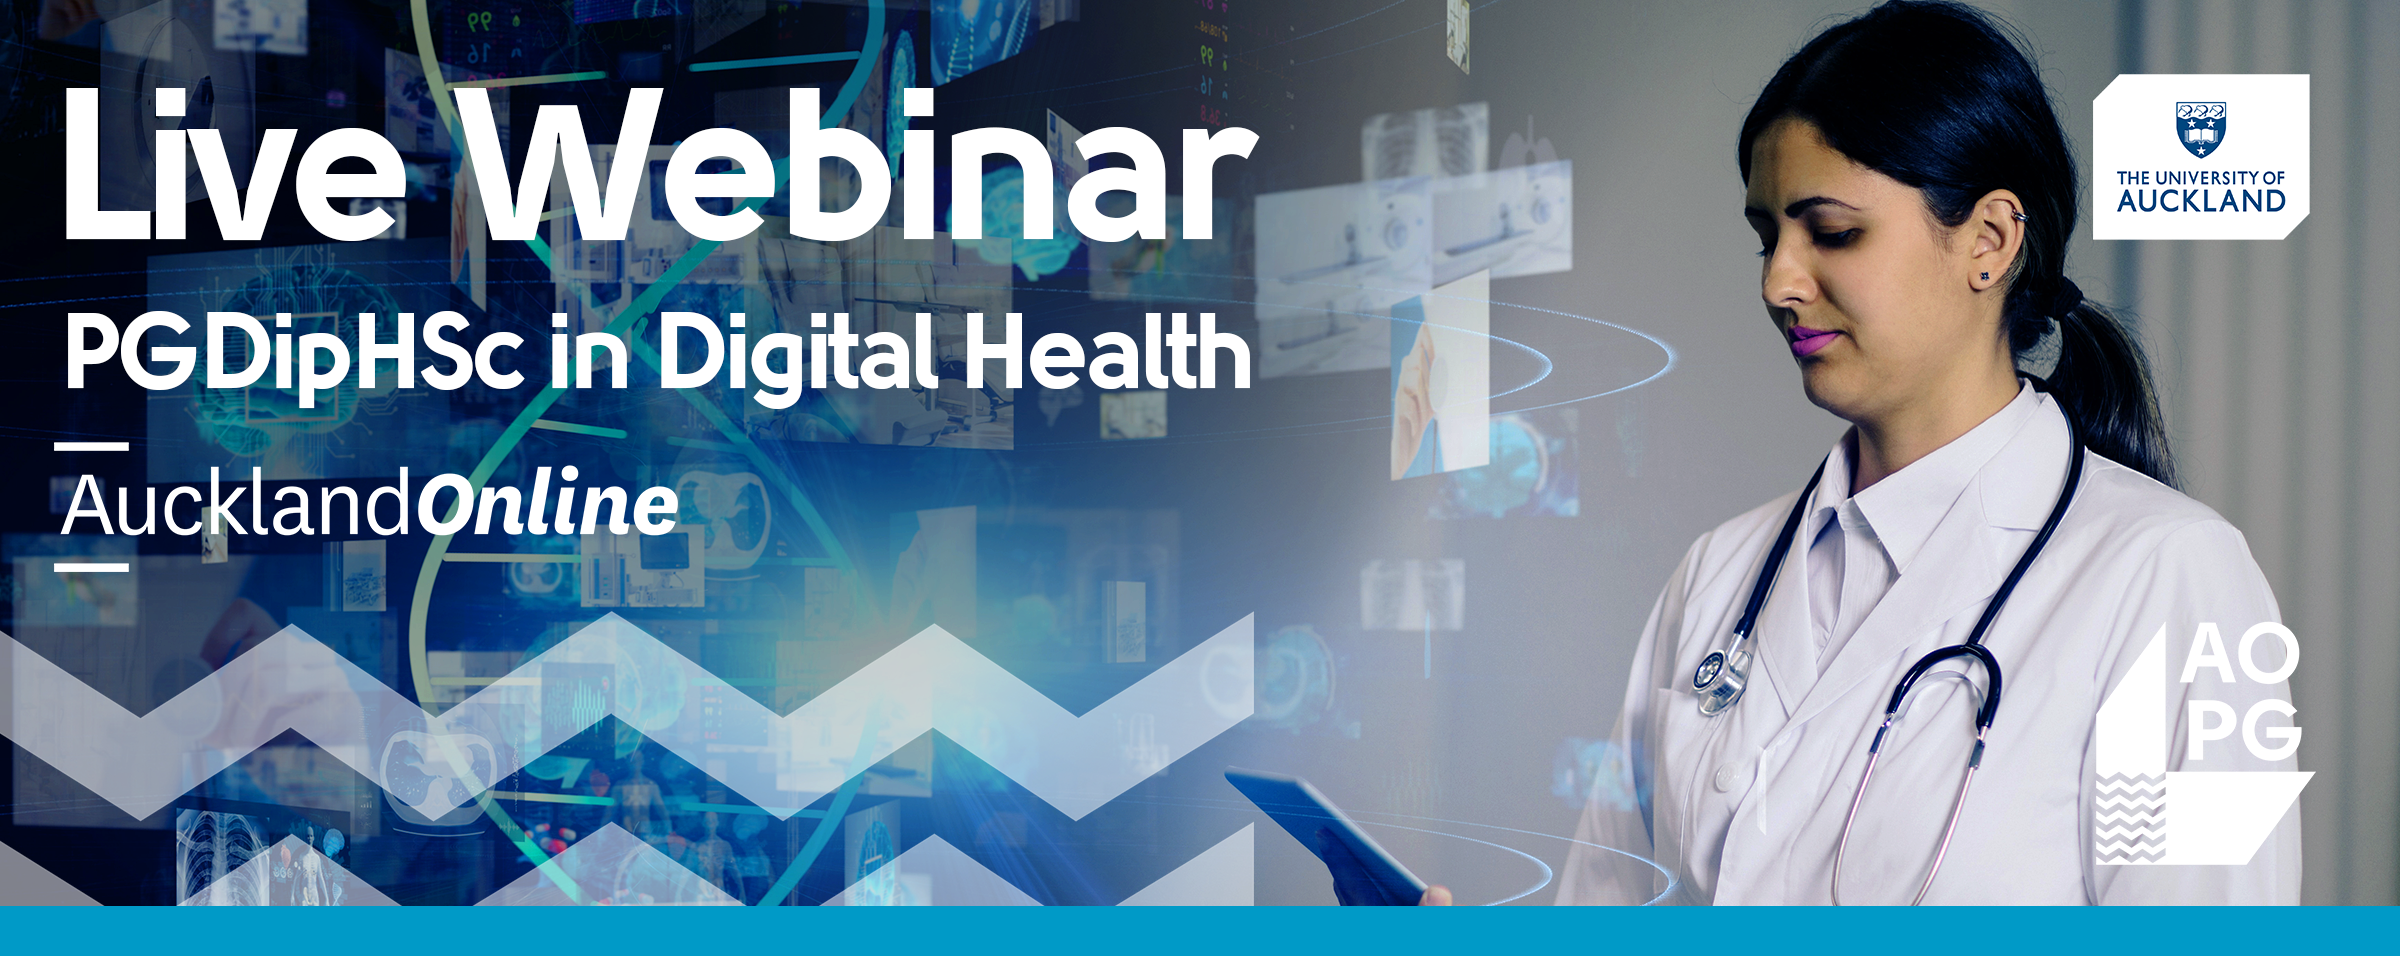 All you need to know about studying a PGHSc in Digital Health with Auckland Online